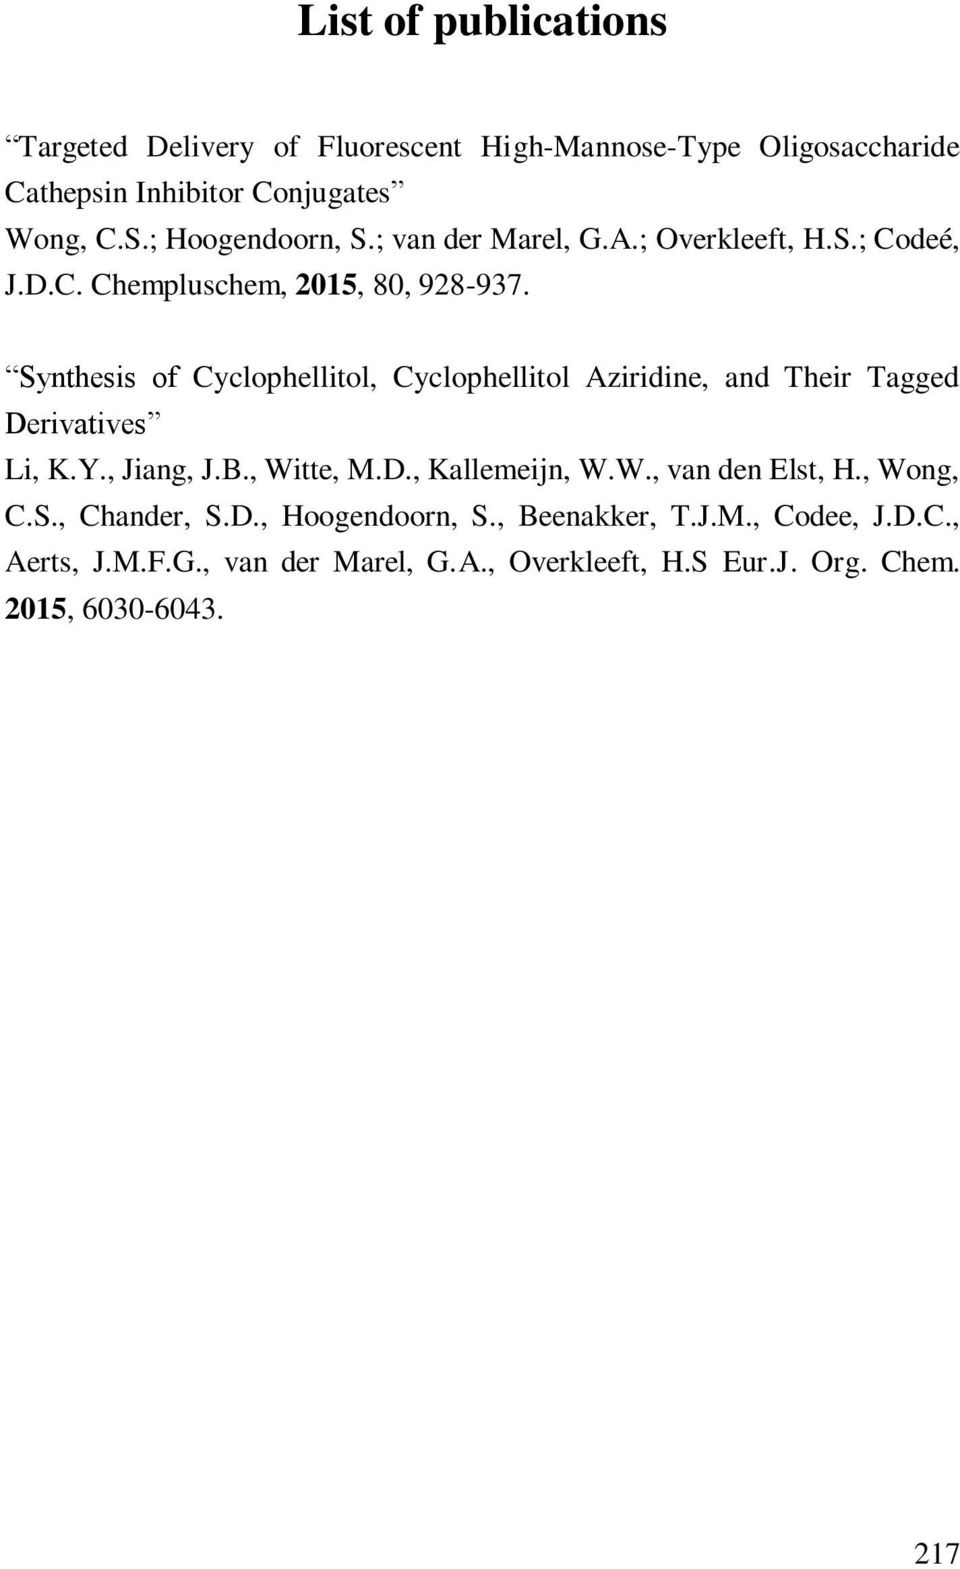 Synthesis of Cyclophellitol, Cyclophellitol Aziridine, and Their Tagged Derivatives Li, K.Y., Jiang, J.B., Witte, M.D., Kallemeijn, W.W., van den Elst, H.